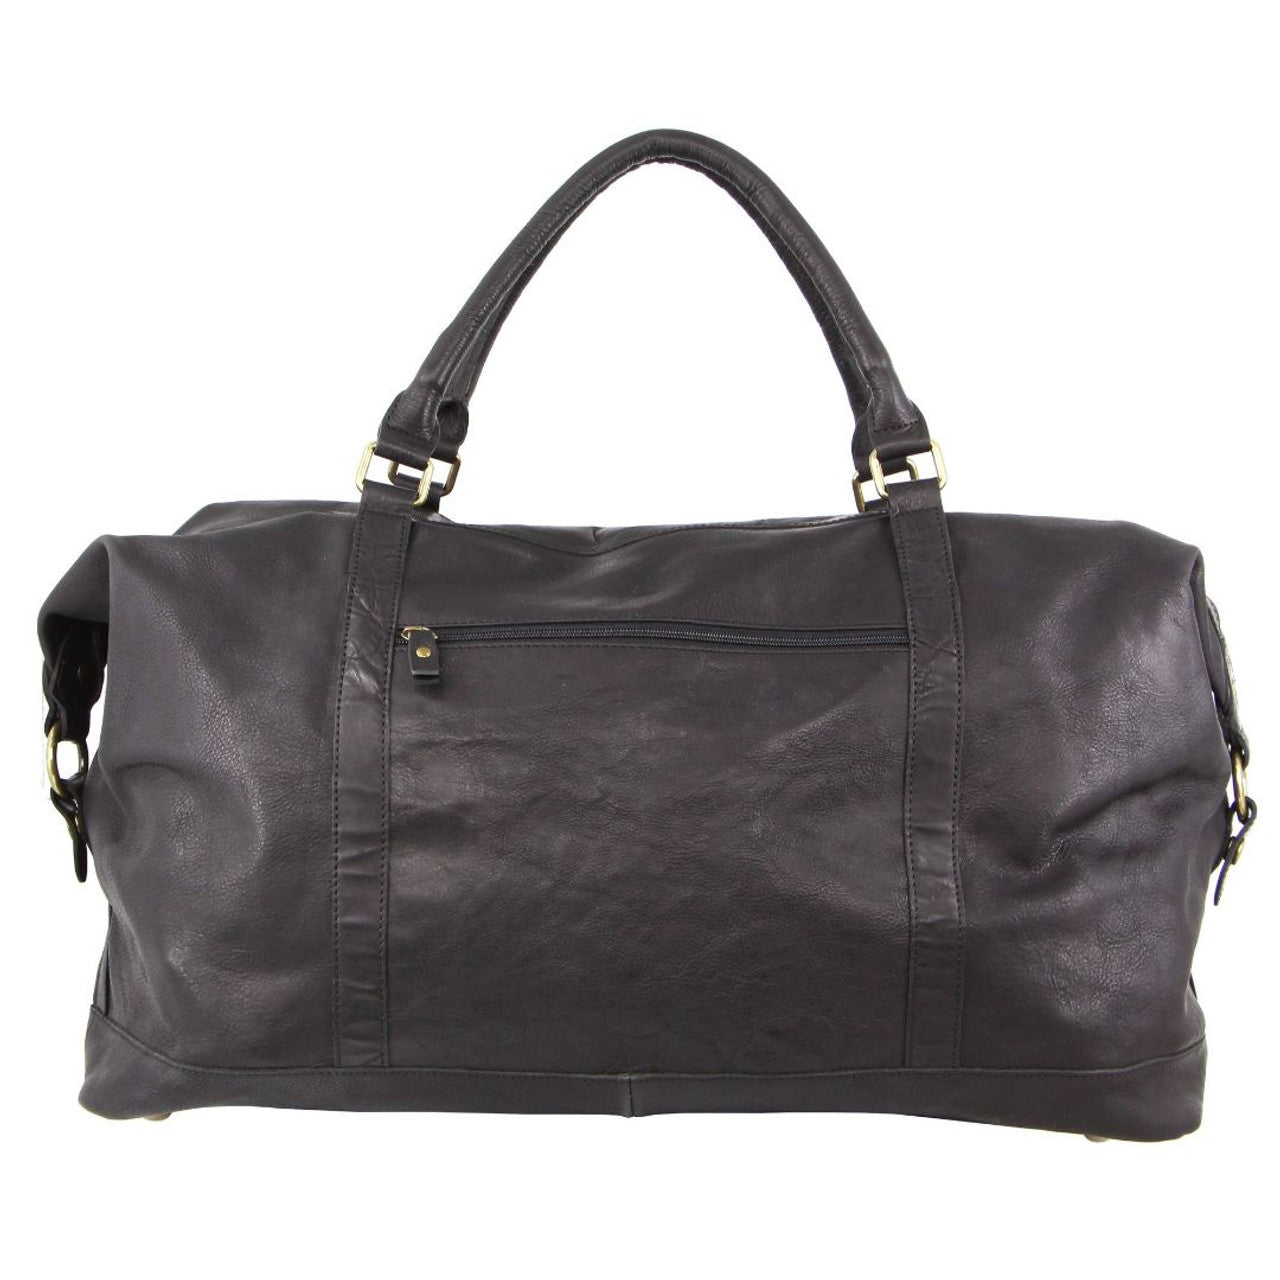 Pierre Cardin - Rustic Leather Overnight Bag with front flap pocket PC3134 - Black-3